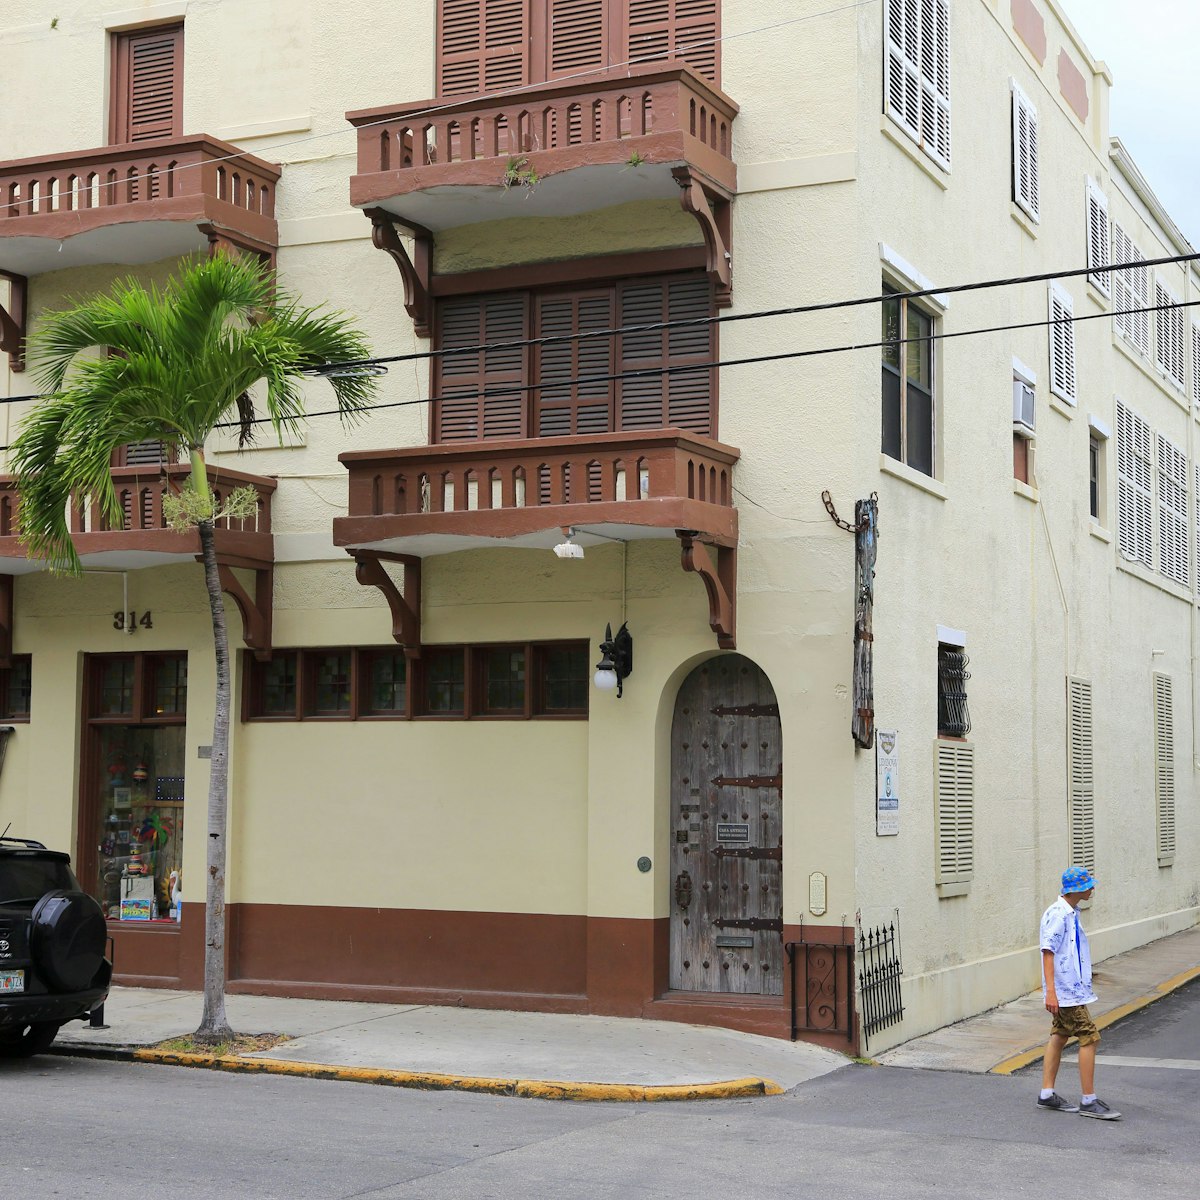 Casa Antigua the Key West's first car dealership and Ernest Hemingway's first Key West residence.